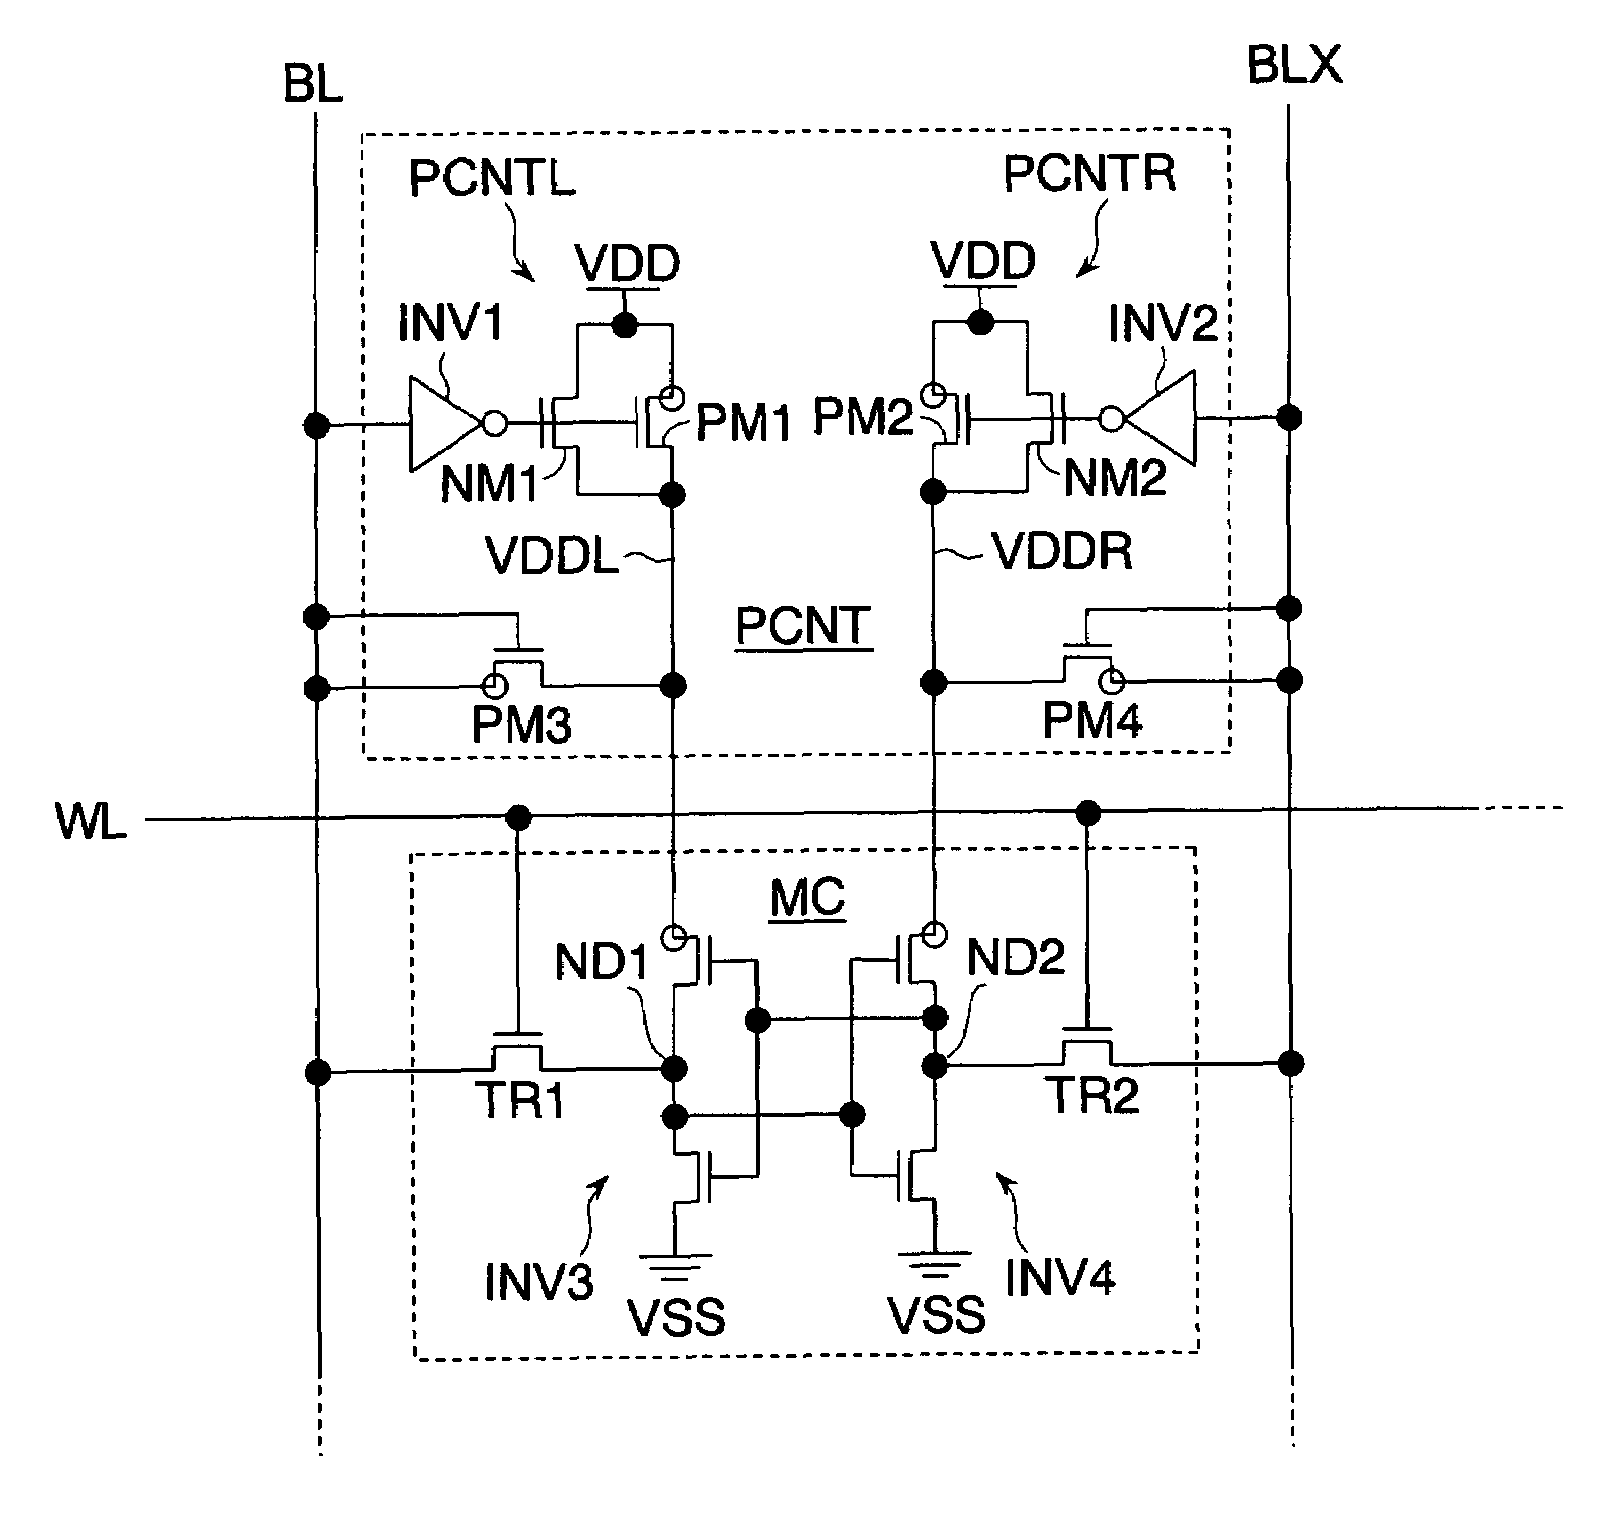 Write margin of SRAM cells improved by controlling power supply voltages to the inverters via corresponding bit lines